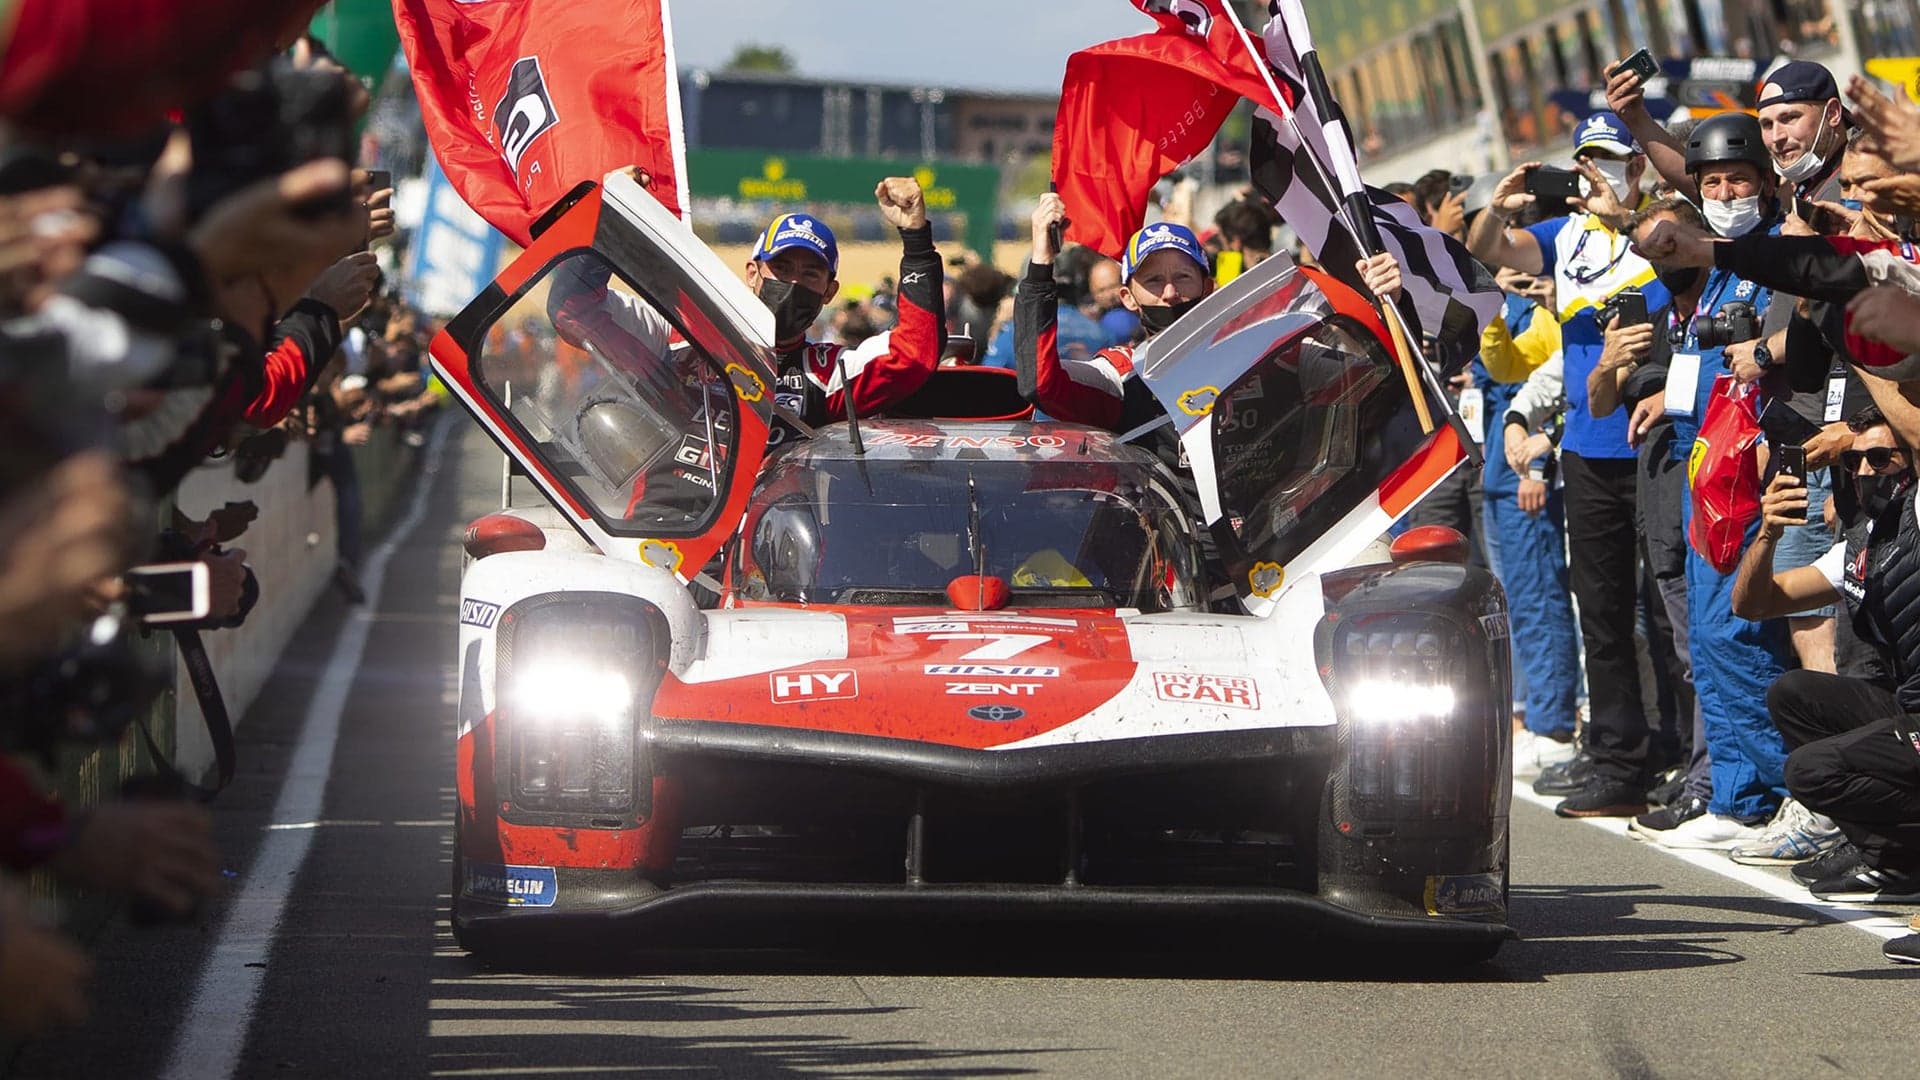 Toyota’s 1-2 Finish at Le Mans Shows It Can Dominate the Hypercar Class, Too